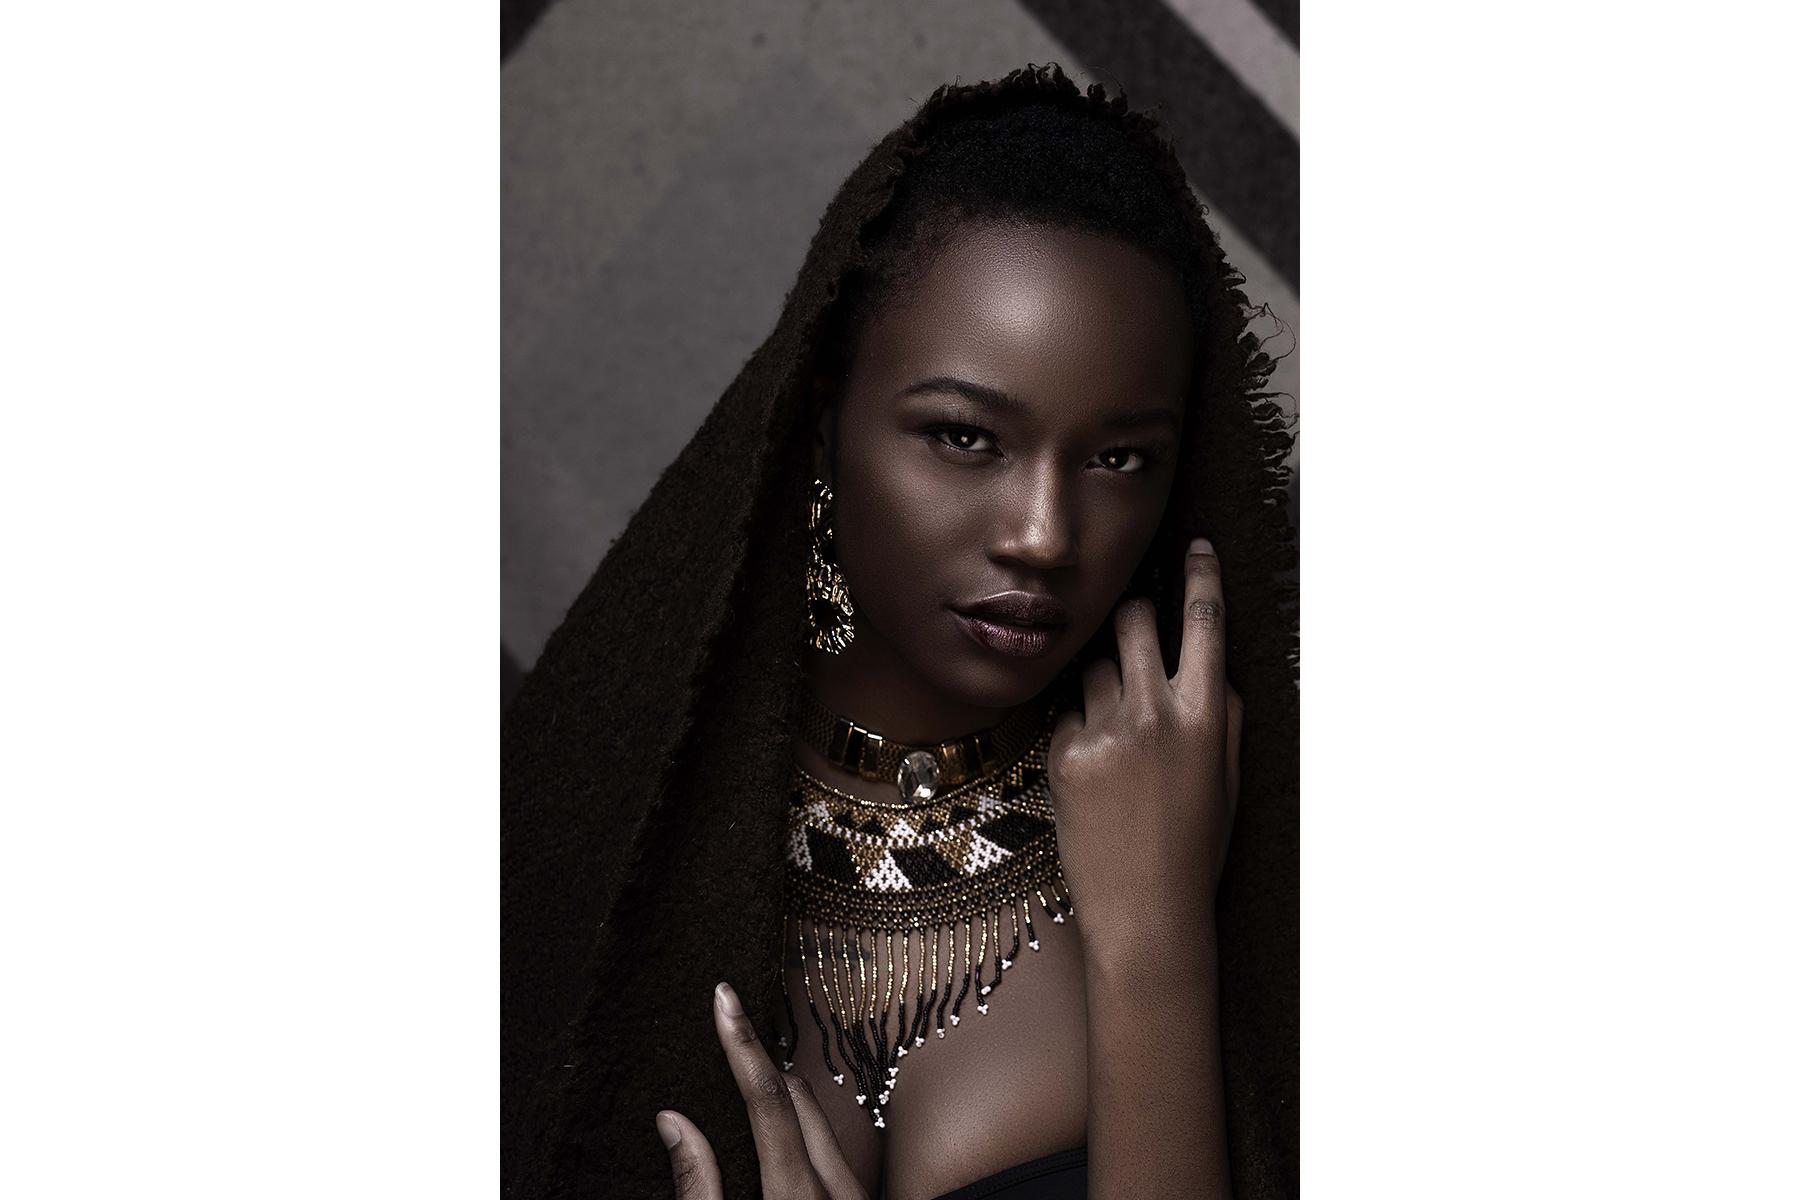 Black Panther inspired beauty photography by Azeez Alayah